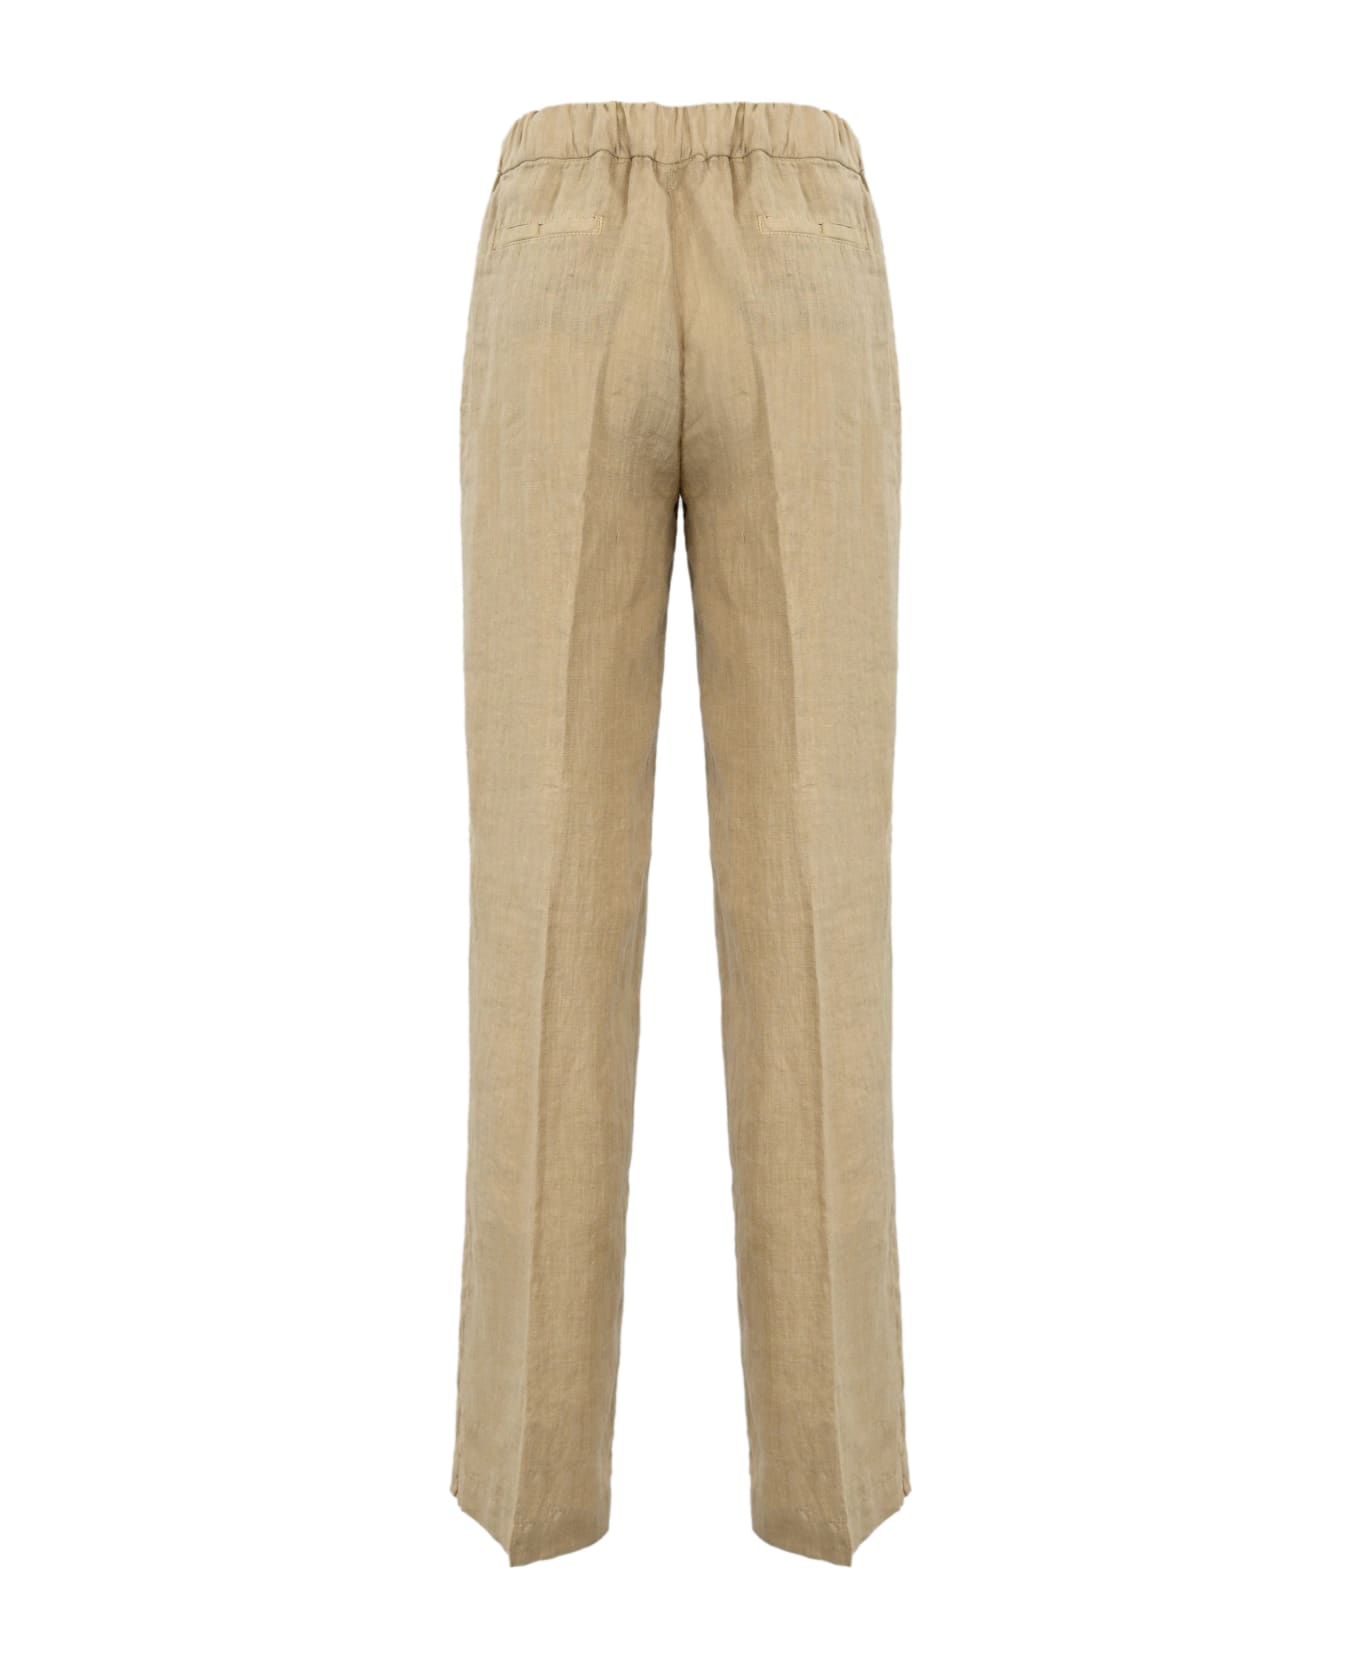 Re-HasH Linen Palazzo Trousers - Beige ボトムス